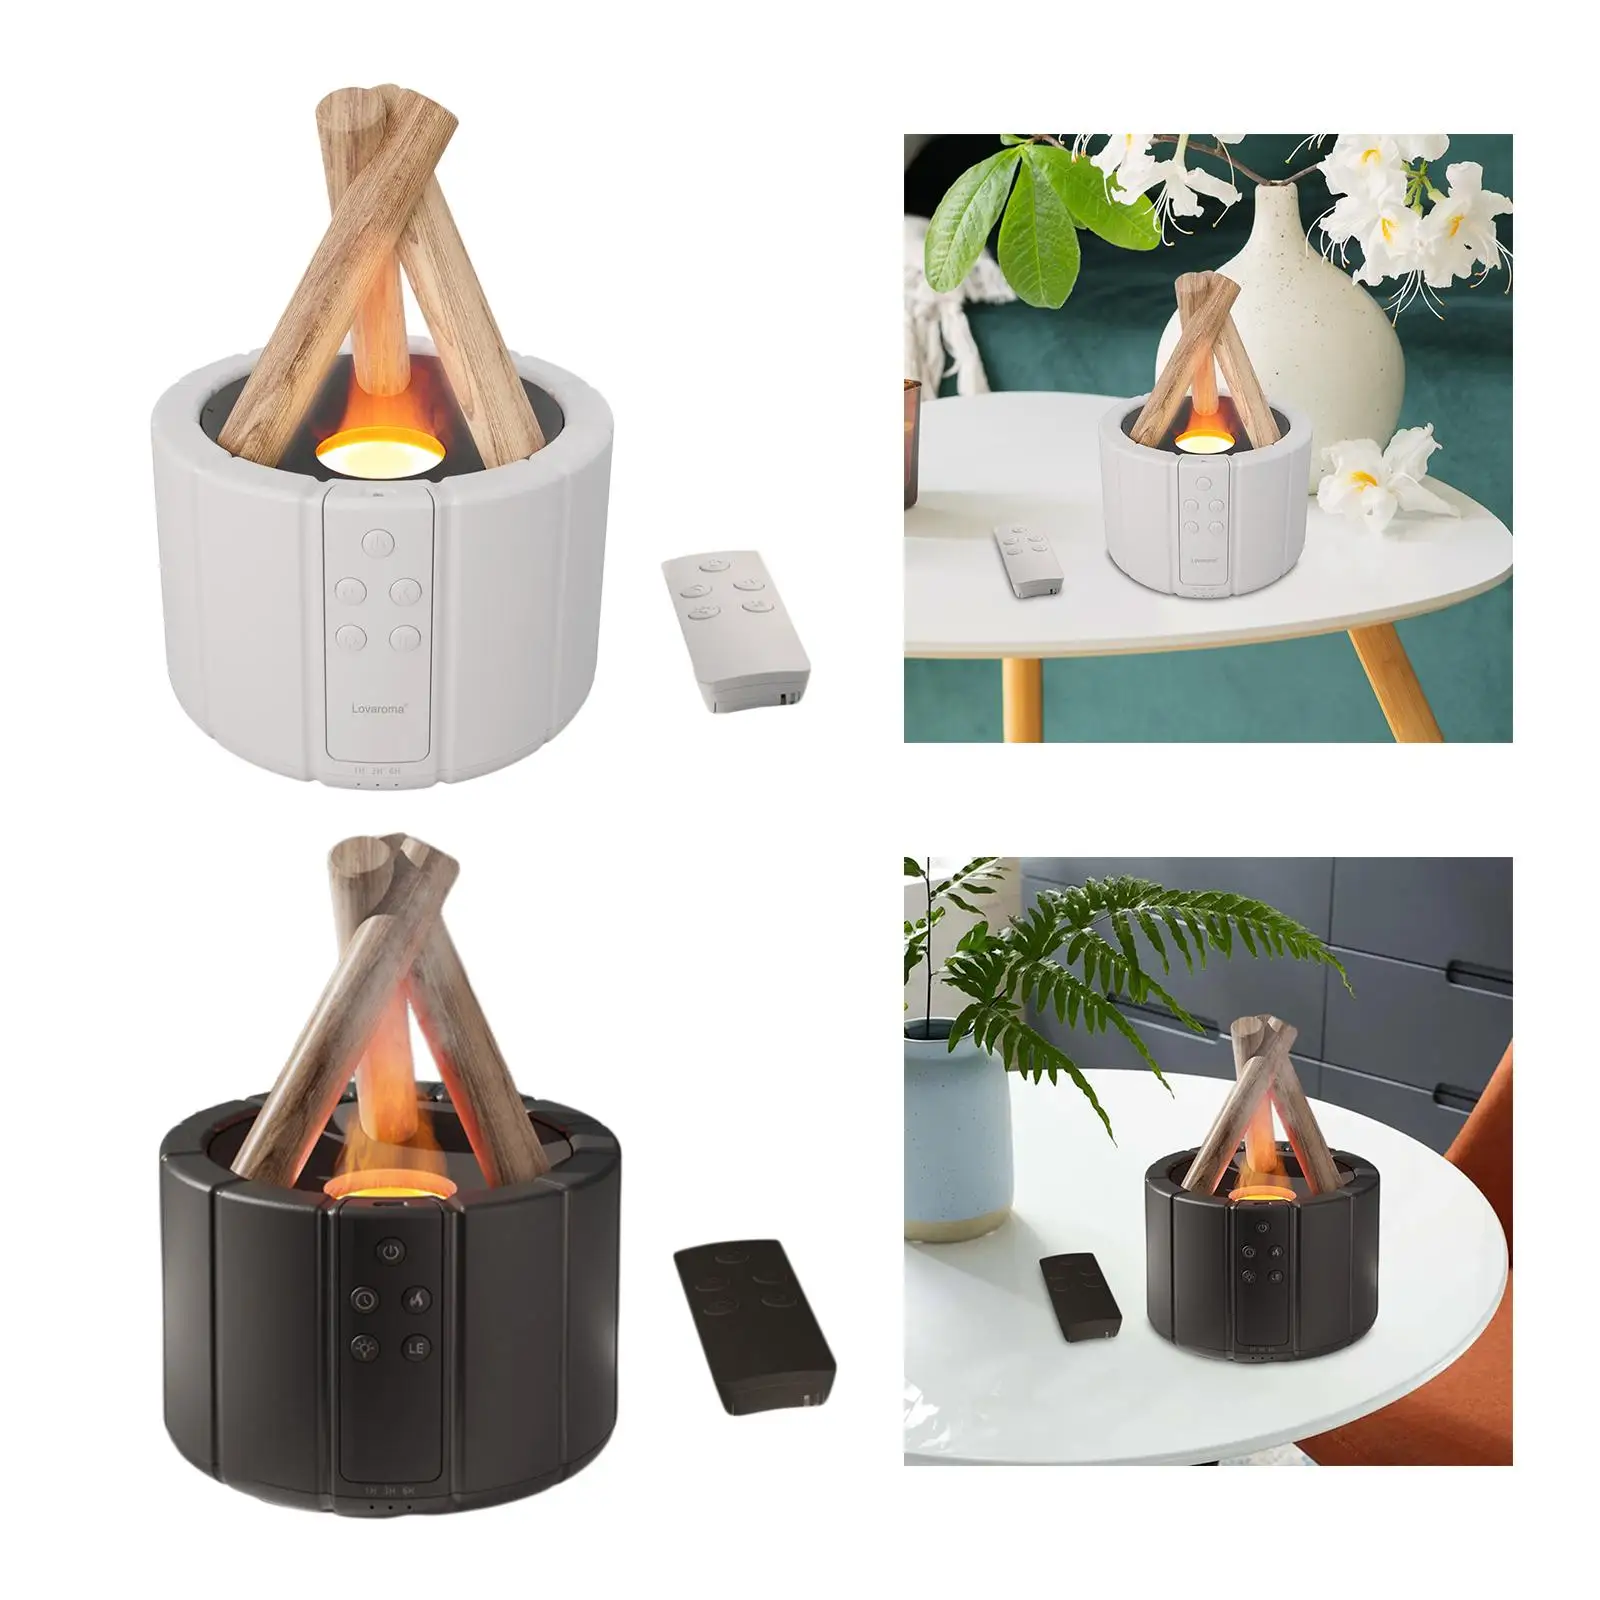 Flame Humidifier Realistic Flame Effect Timer Quiet USB 7 Color Lights Changing Oil Diffuser for Office Yoga Spa Study